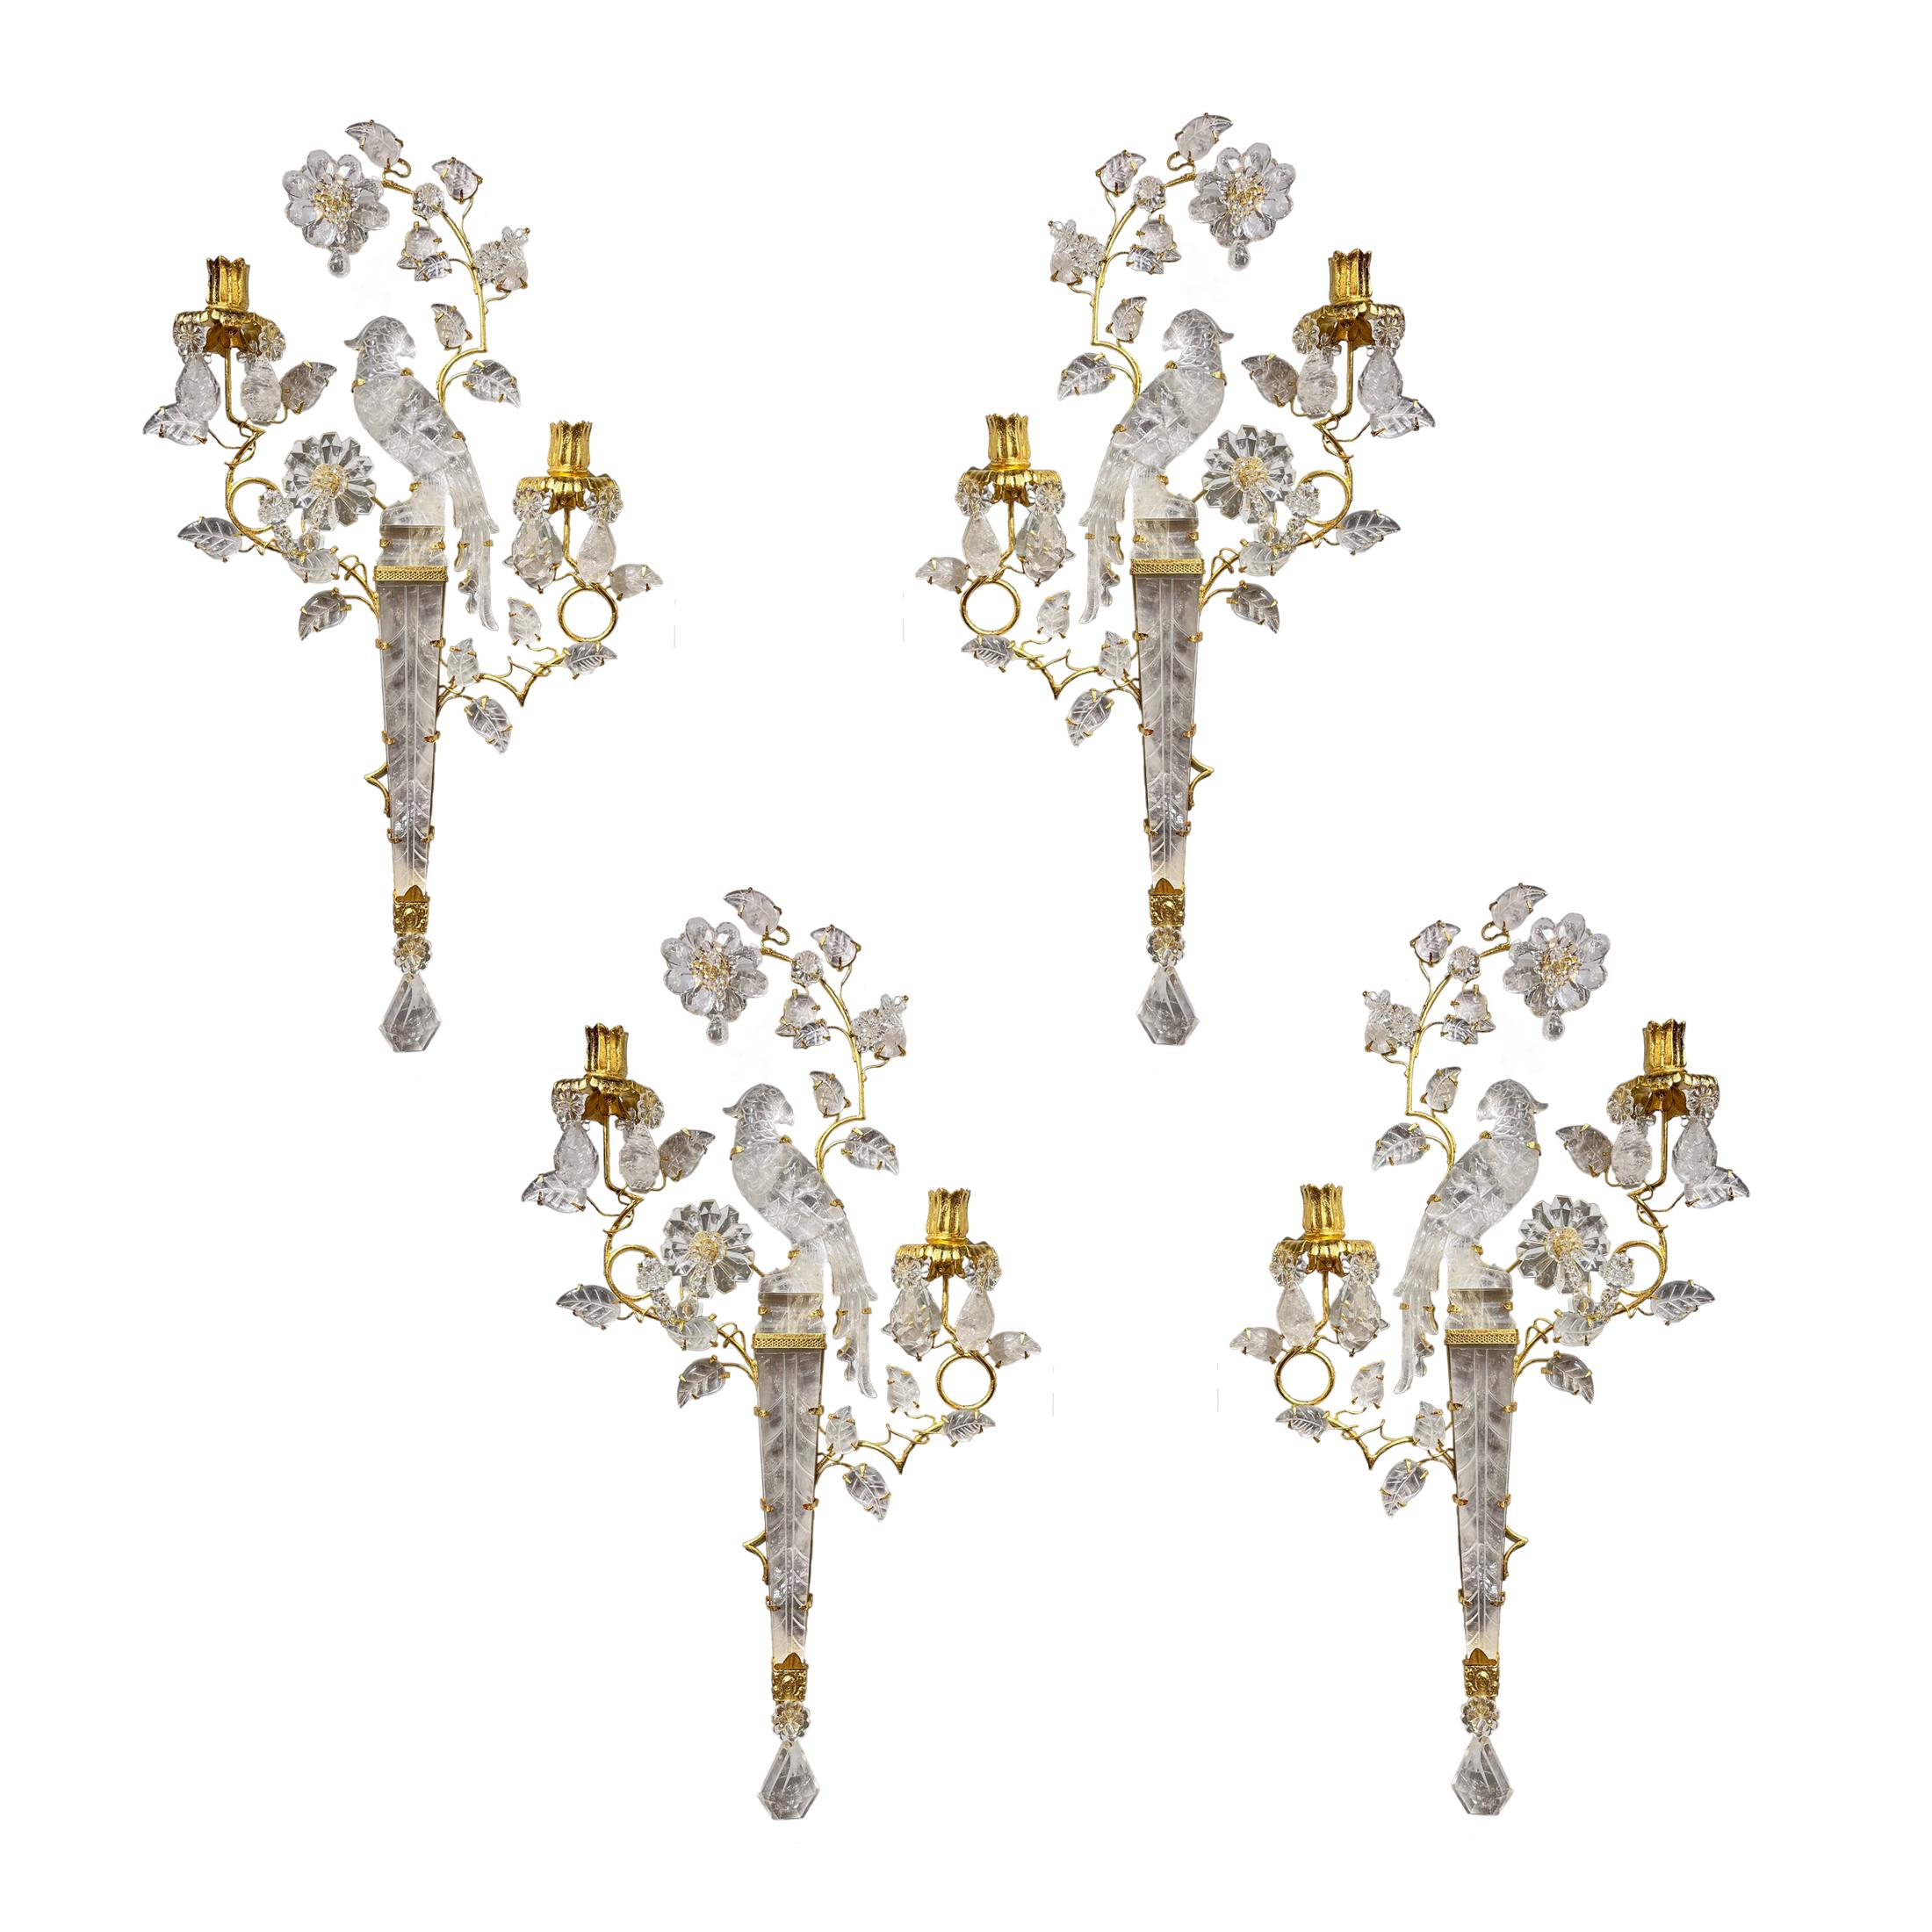 20th Century An Exquisite Set of Four Two-light Rock Crystal Sconces After Baguès For Sale